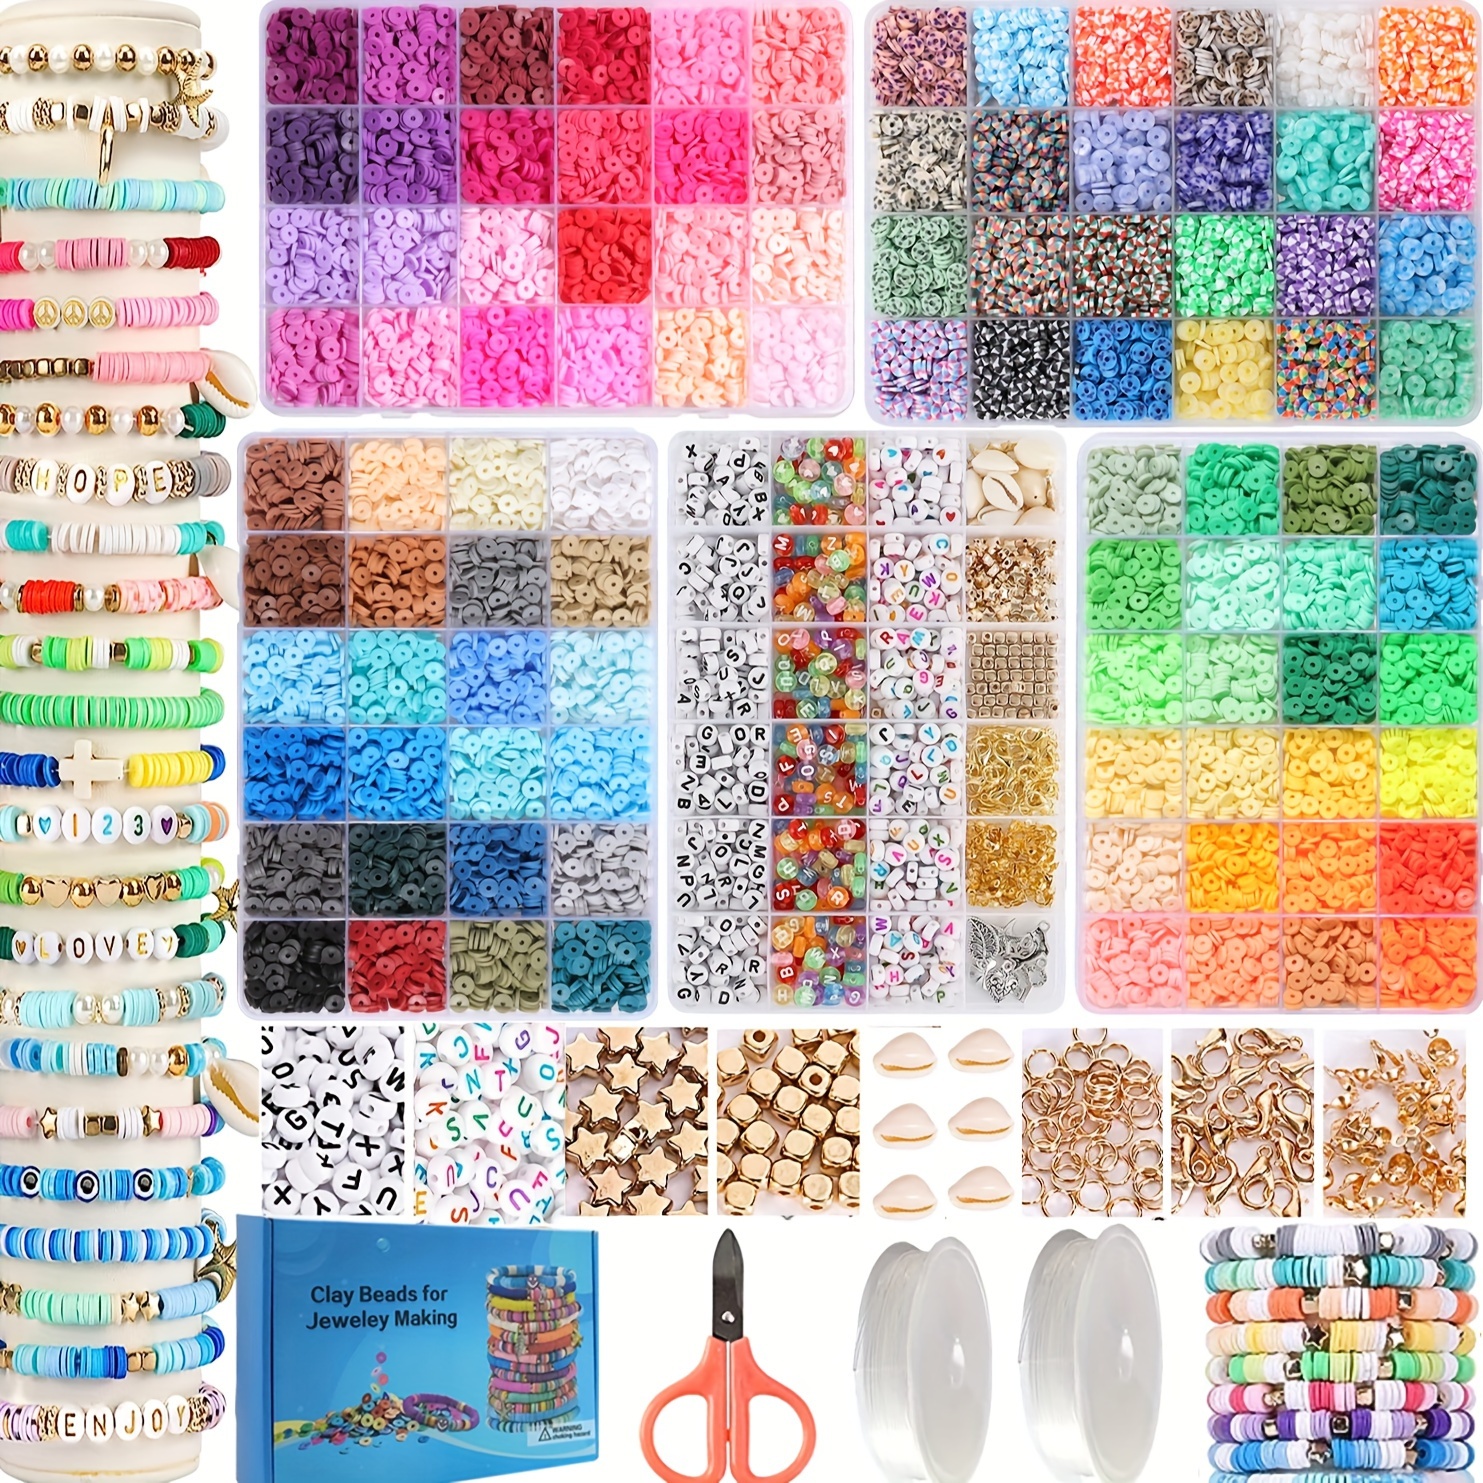 7200 Pcs Clay Beads Bracelet Making Kit, Preppy Friendship Flat Polymer  Beads Jewelry Making Kits With Charms And Elastic Strings,Crafts Gifts Set  For